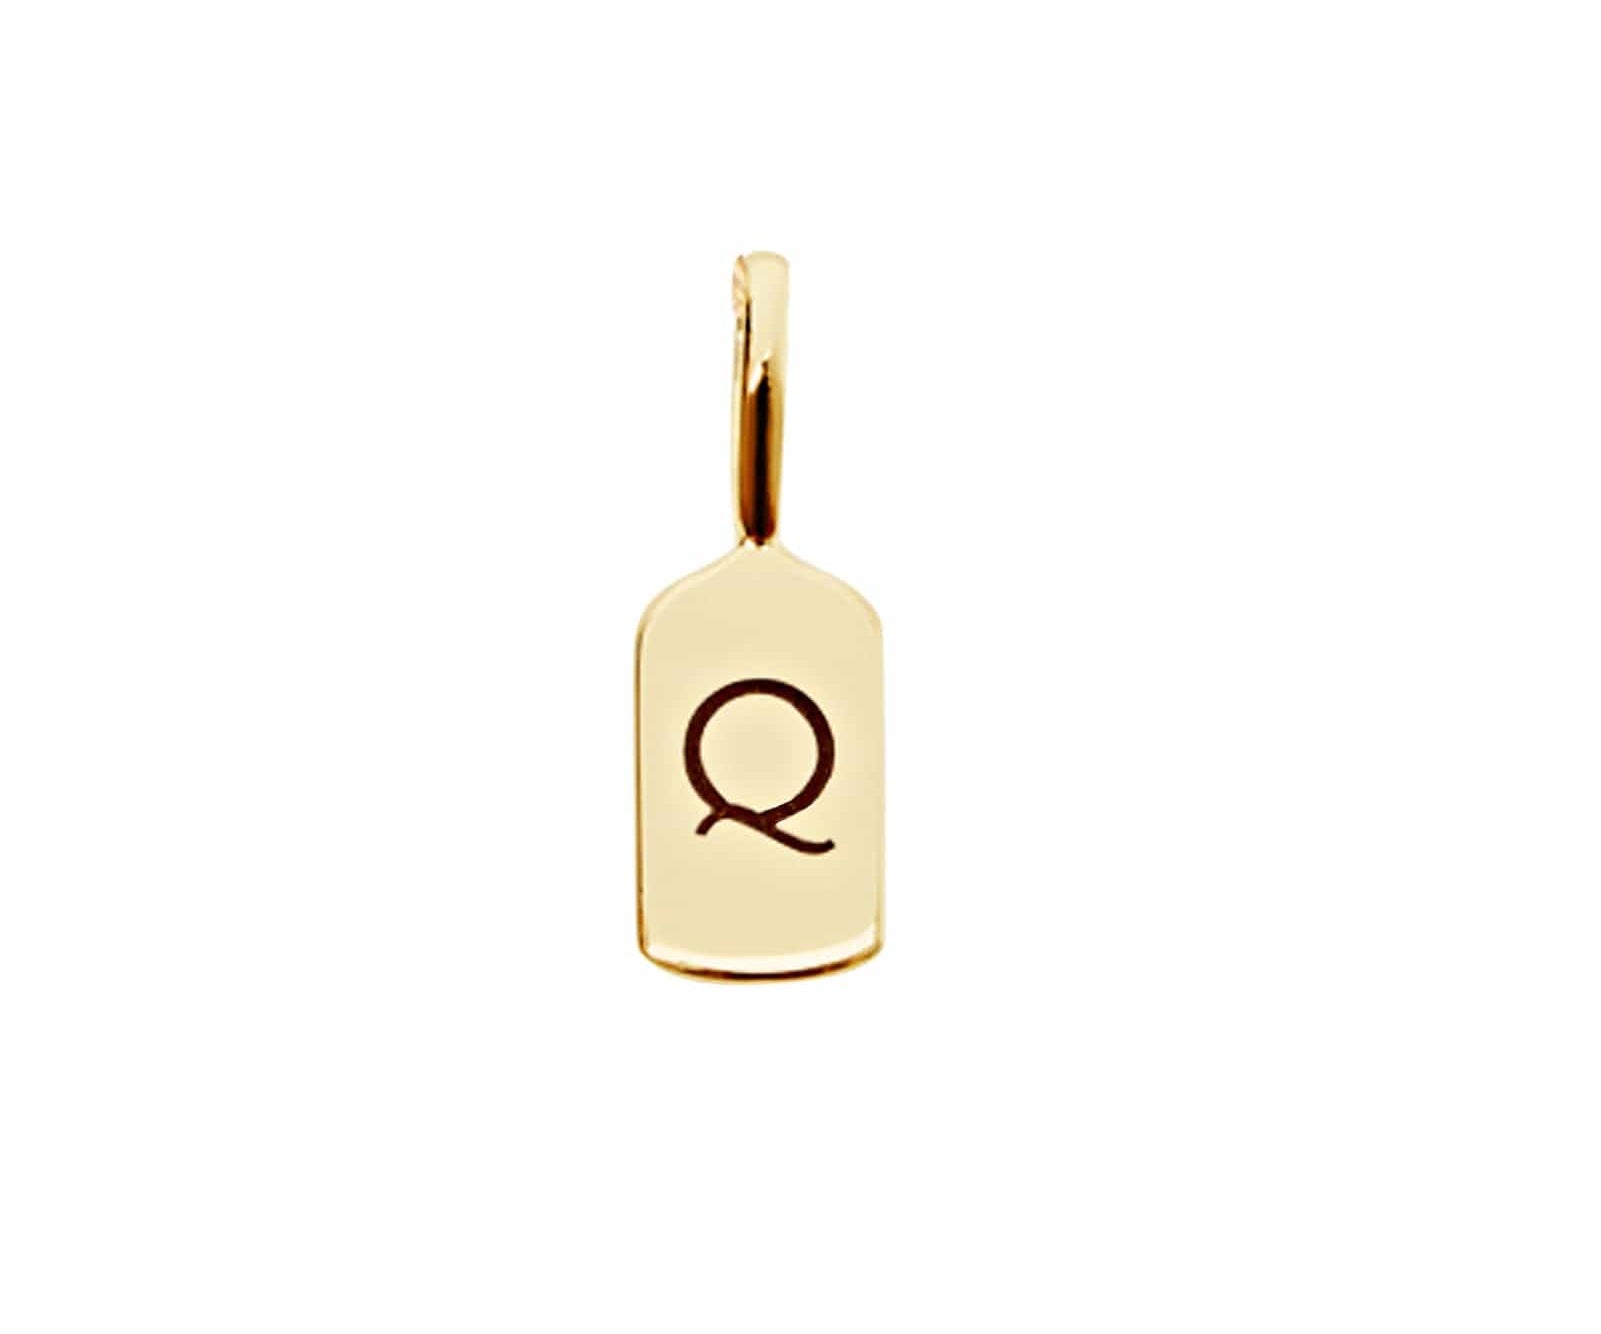 Picture of  Luna Rae solid 9k gold Letter Q